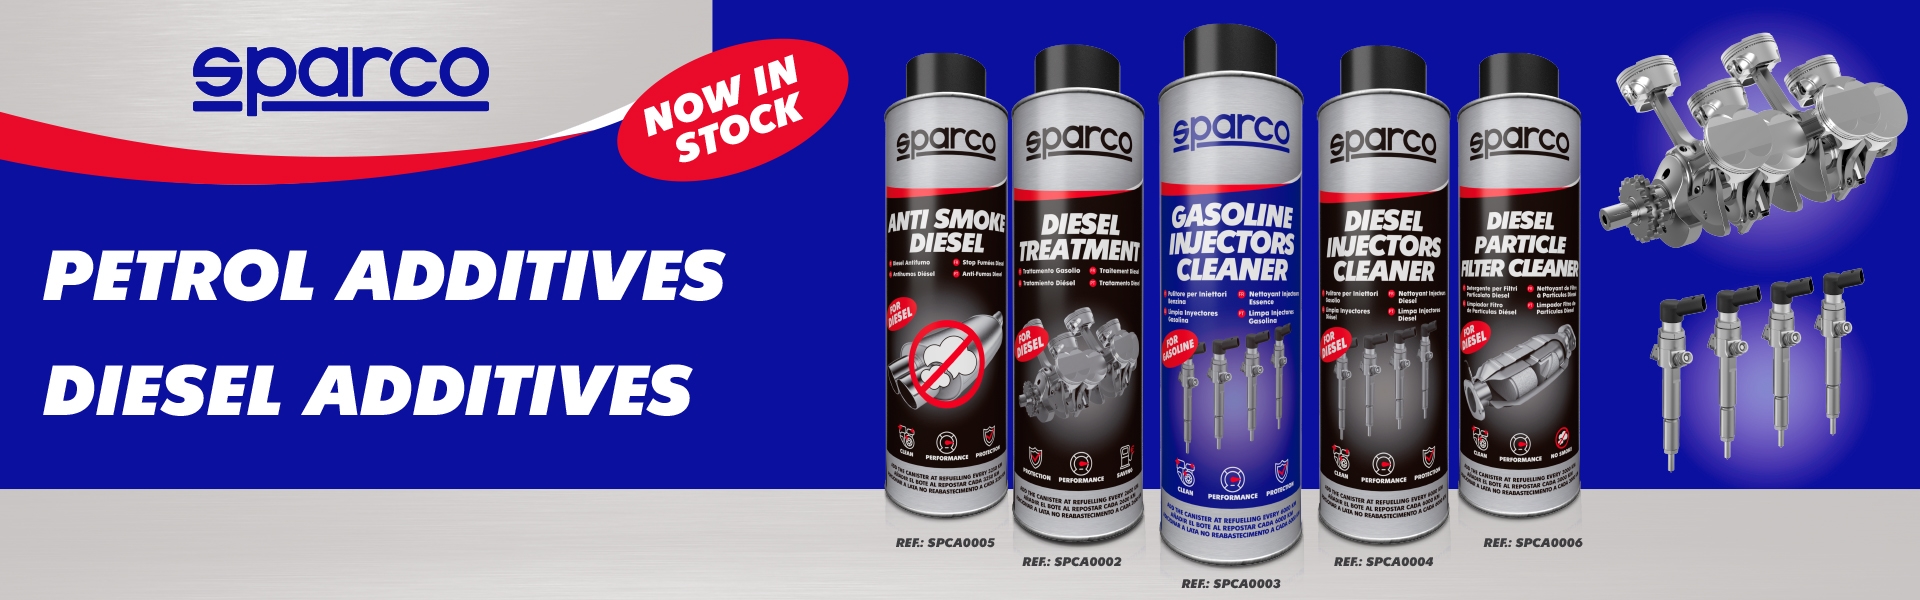 SPARCO ADDITIVES